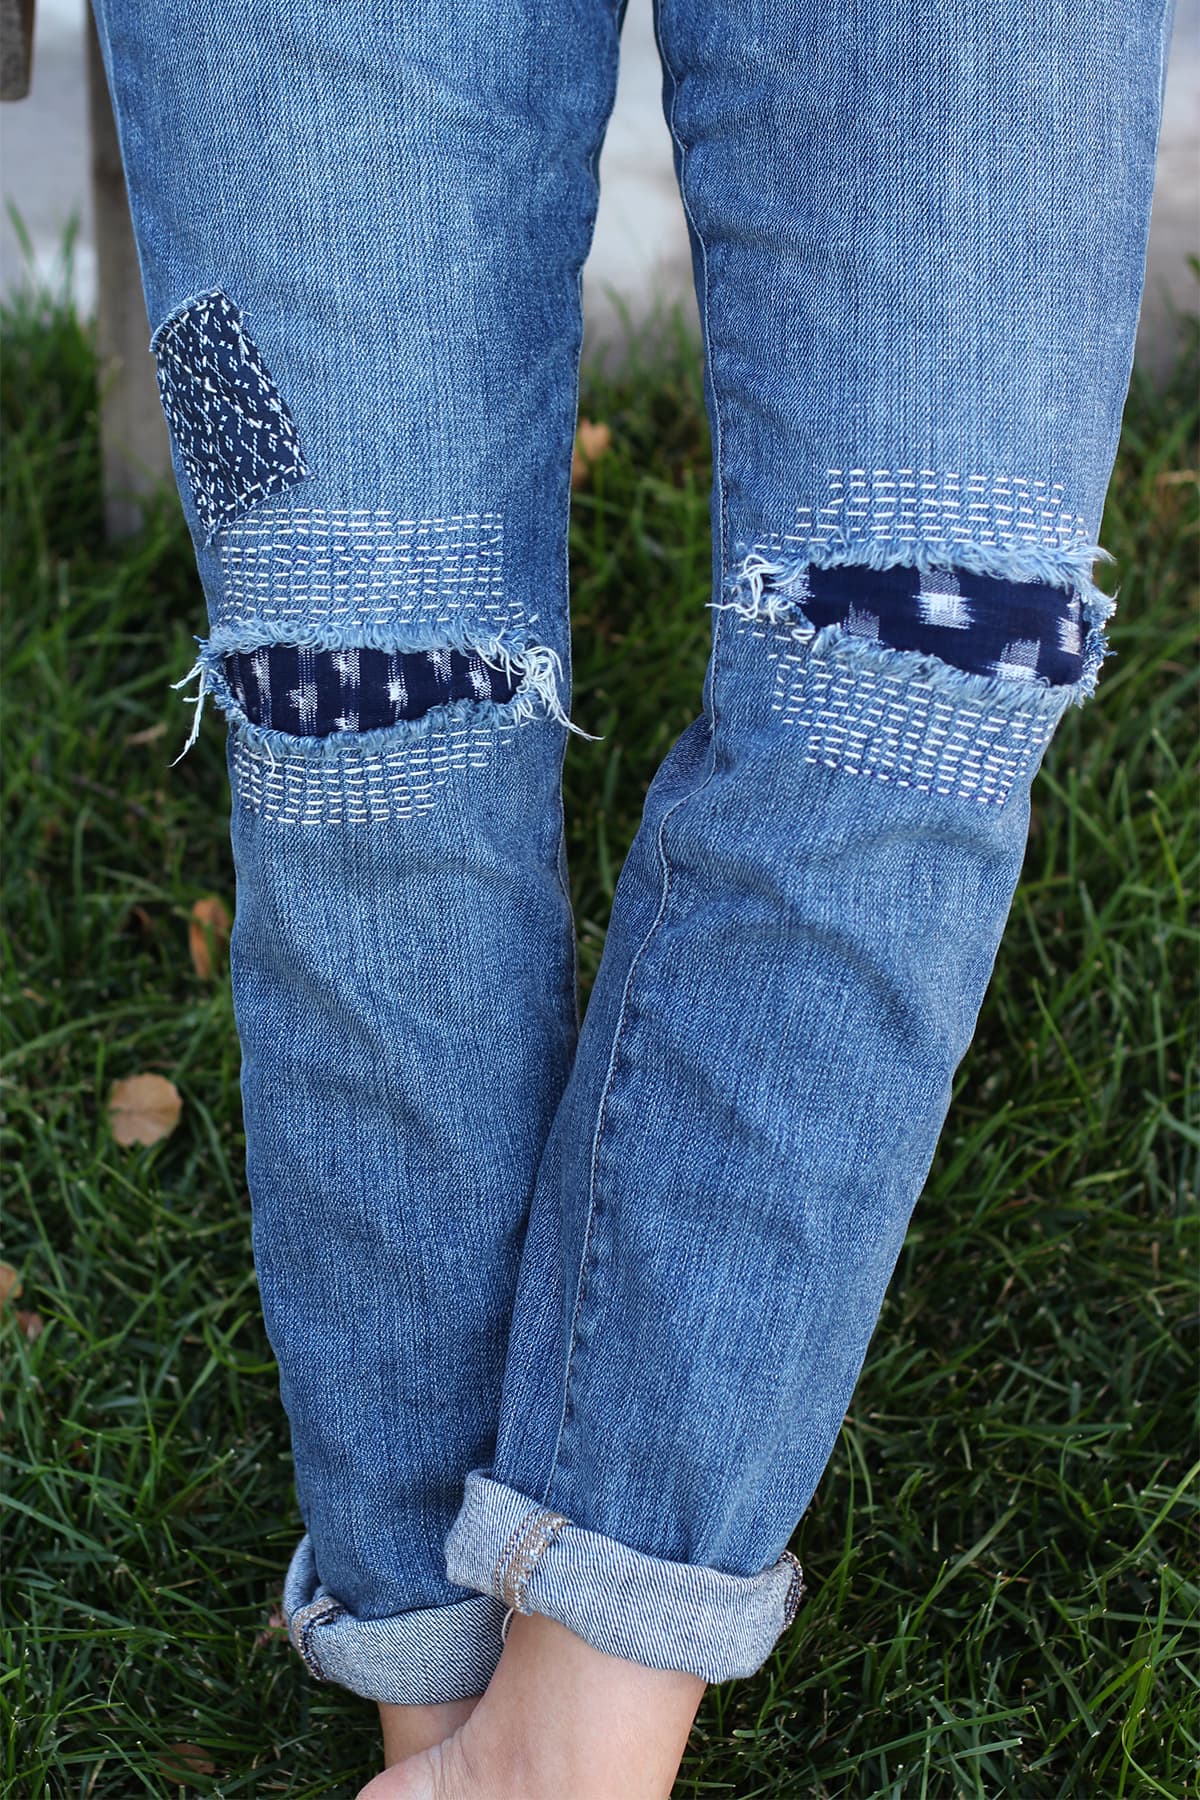 Denim Repair: How to Patch Jeans With Holes | Apartment Therapy